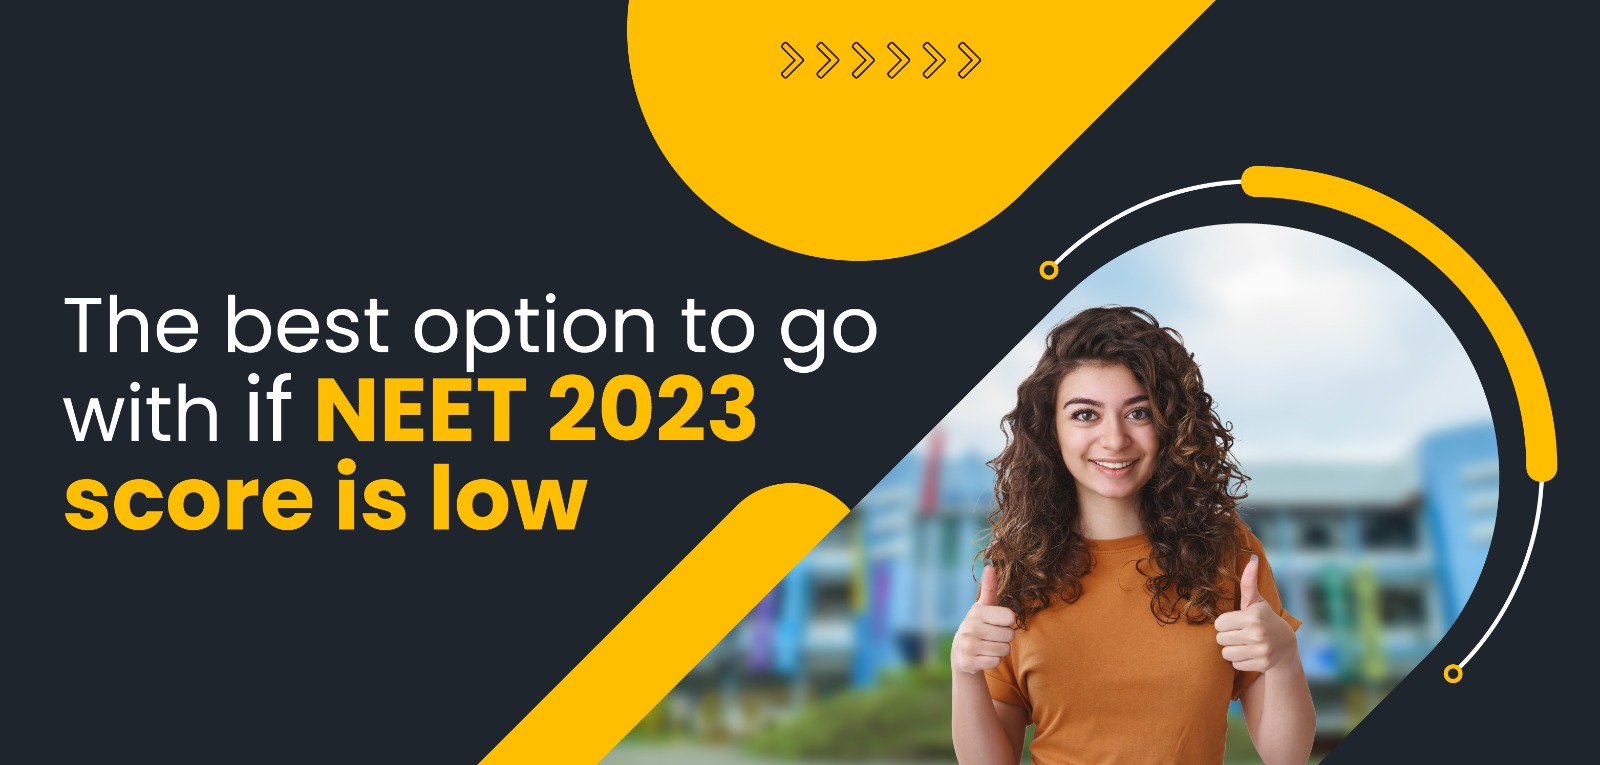 The best option to go with if NEET 2023 score is low 